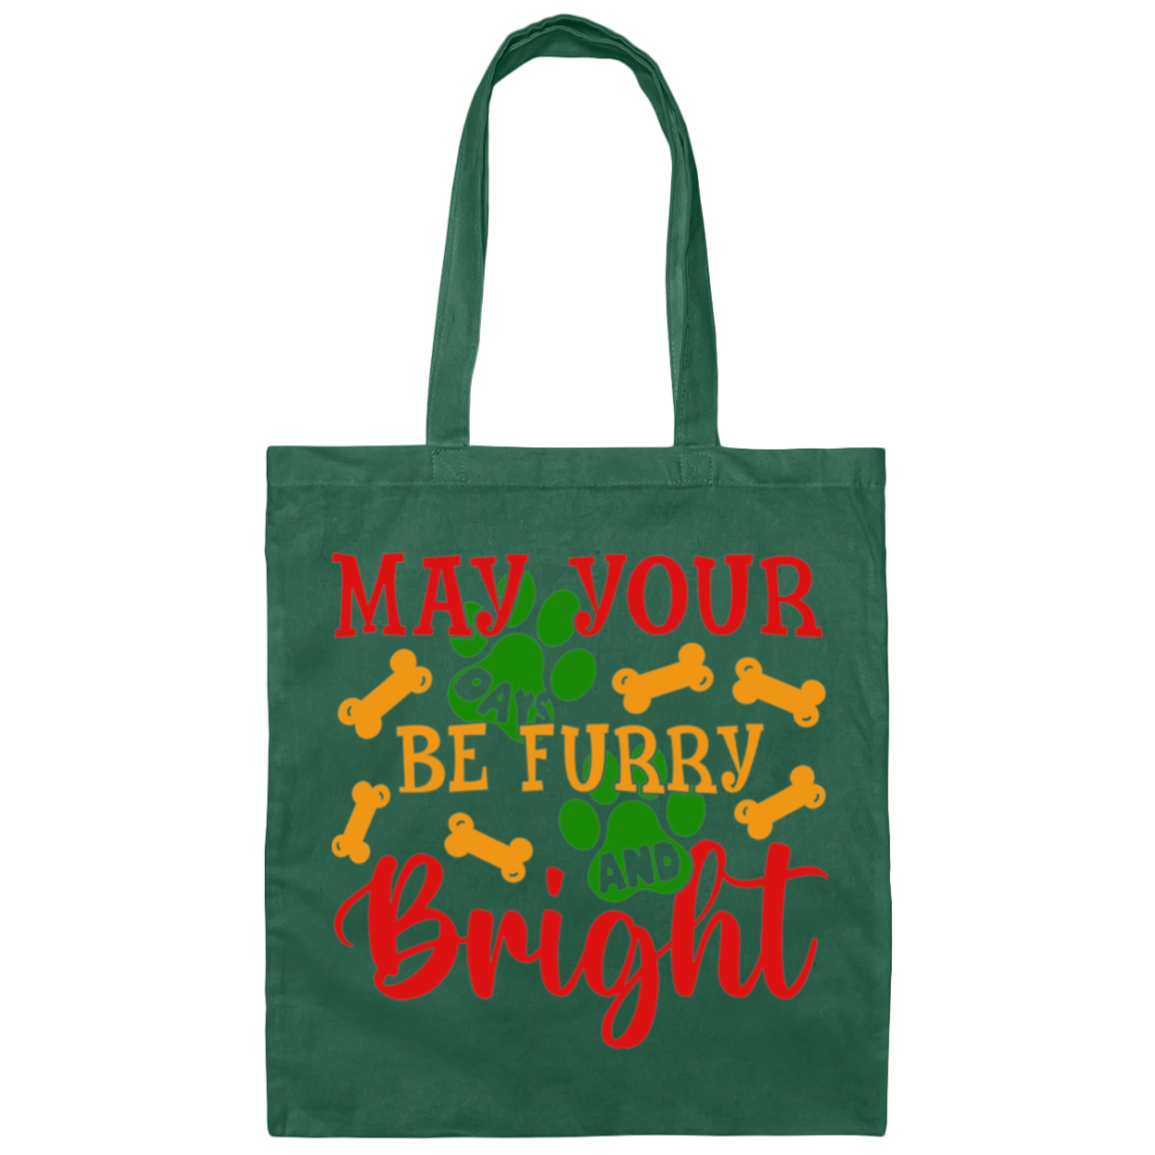 May Your Days Be Furry and Bright Dog Christmas Canvas Tote Bag